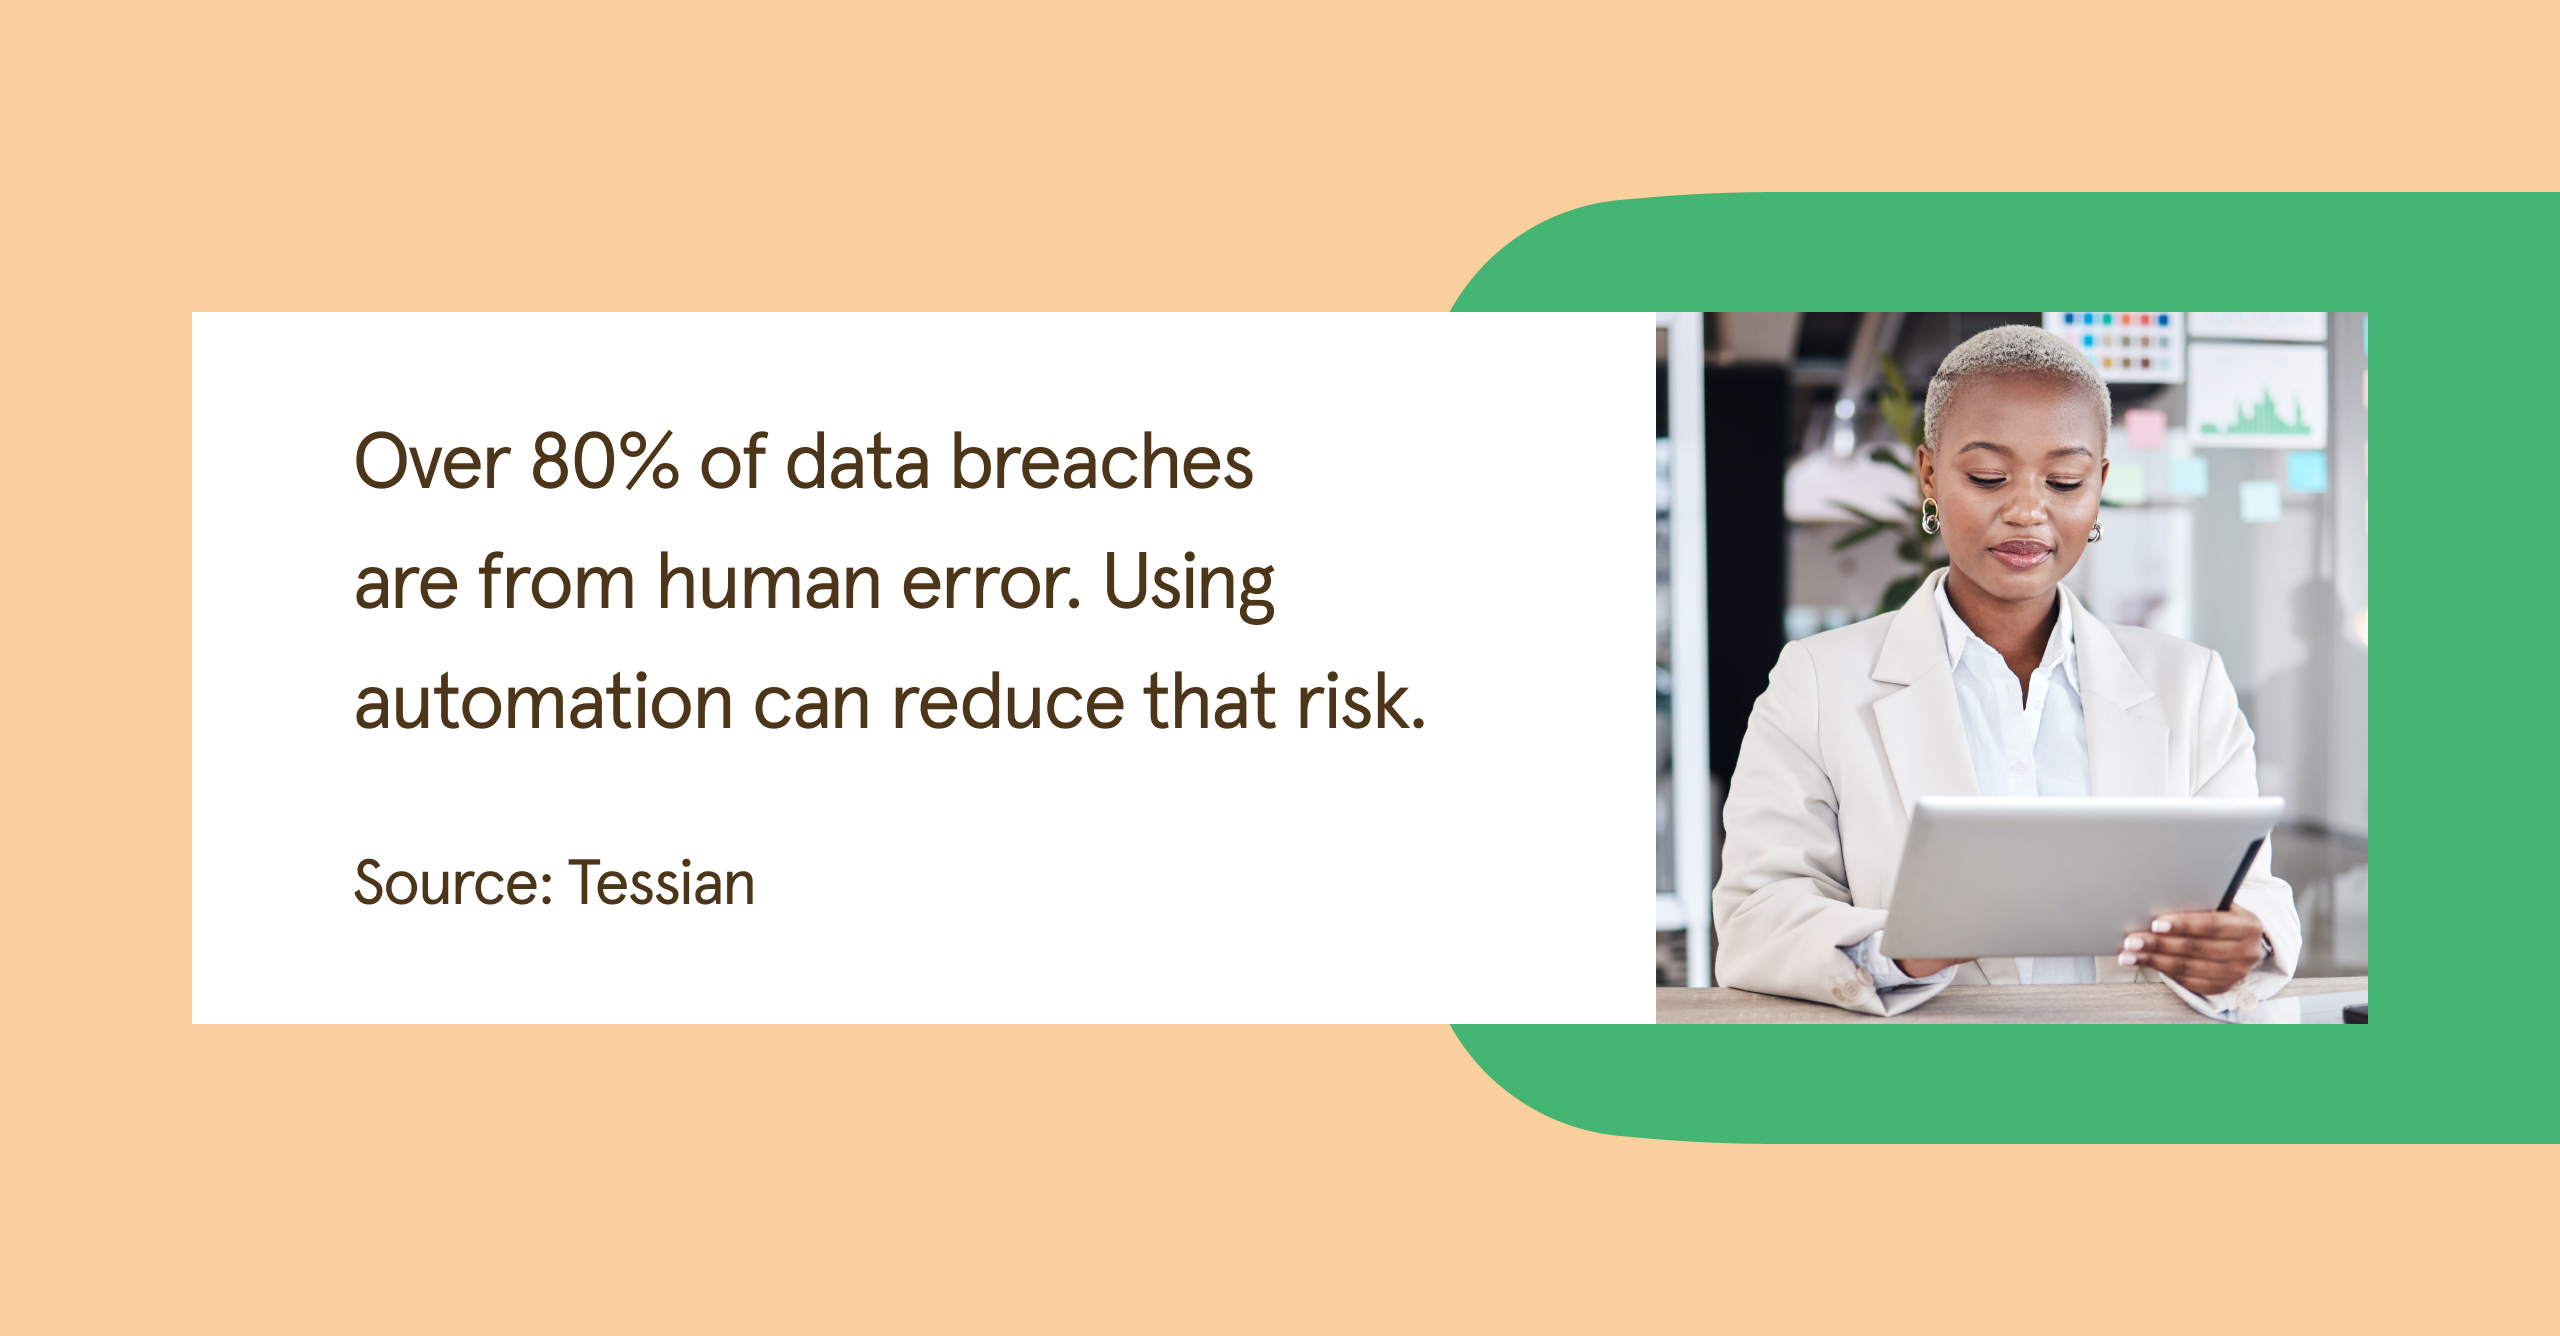 According to Tessian, over 80% of data breaches are from human error. Using automation can reduce that risk.